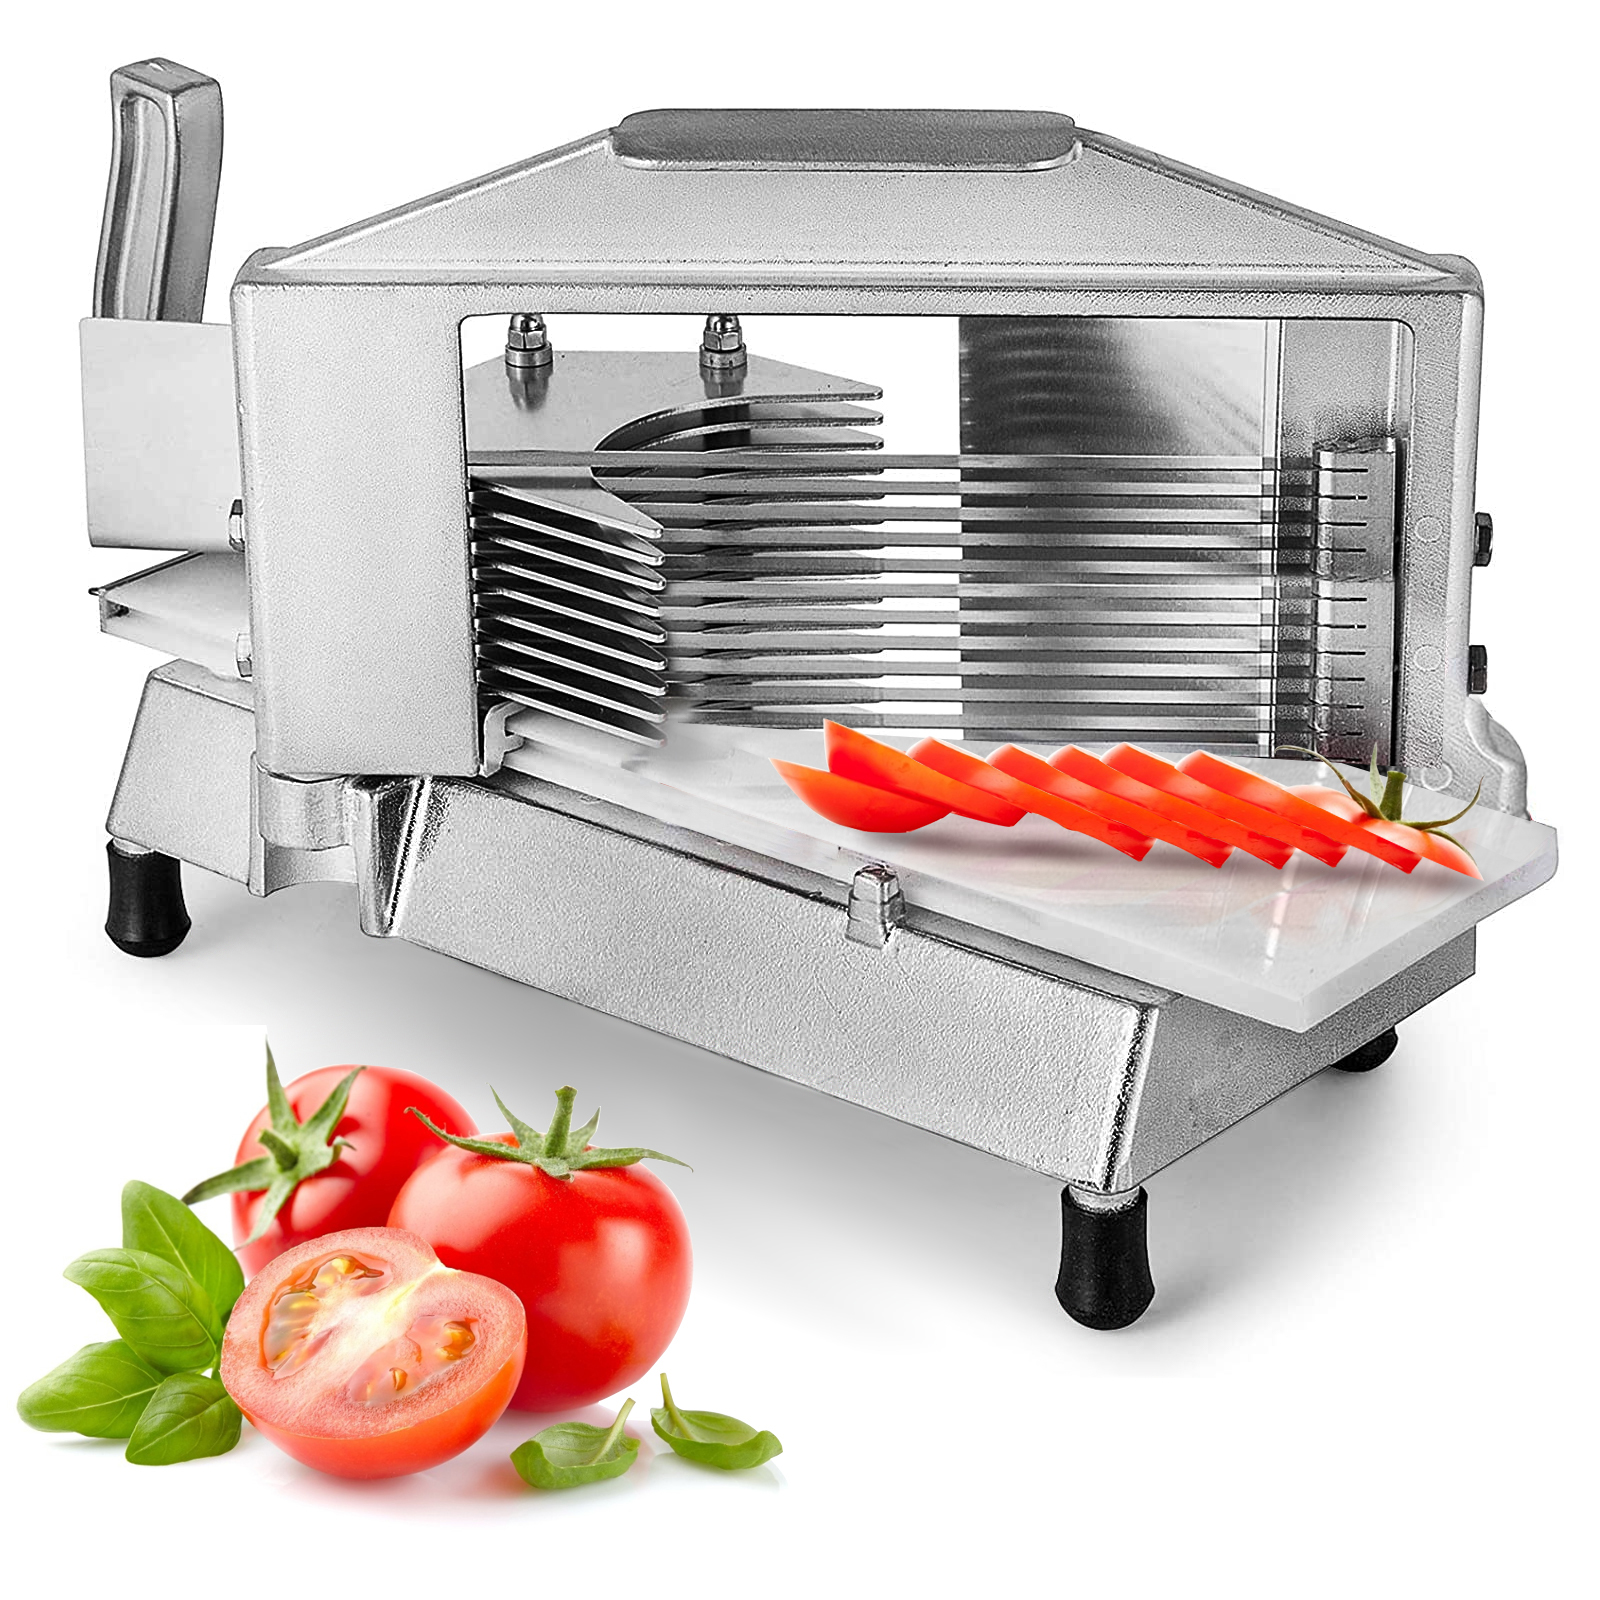 Rapid Slicer,Suitable for Various Fruits and Vegetables,Lemon  Slicer,5-Speed Adjustment to Make the Slices Uniform Thickness,Double  Protection to